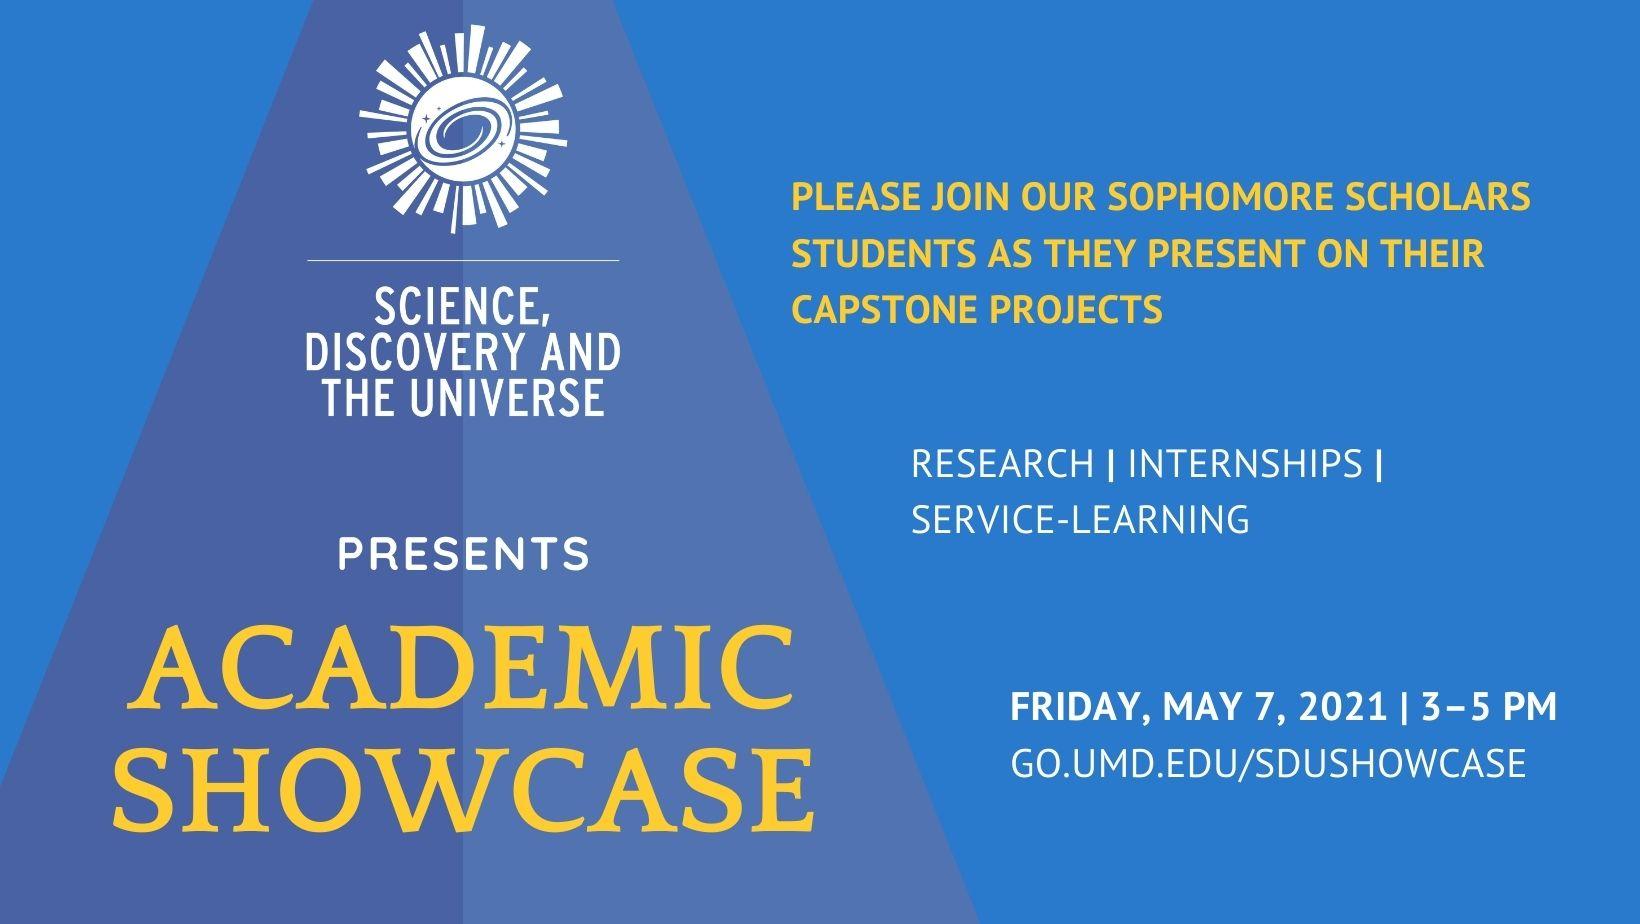 Join SDU's Academic Showcase on Friday, May 7, from 3 to 5 p.m.